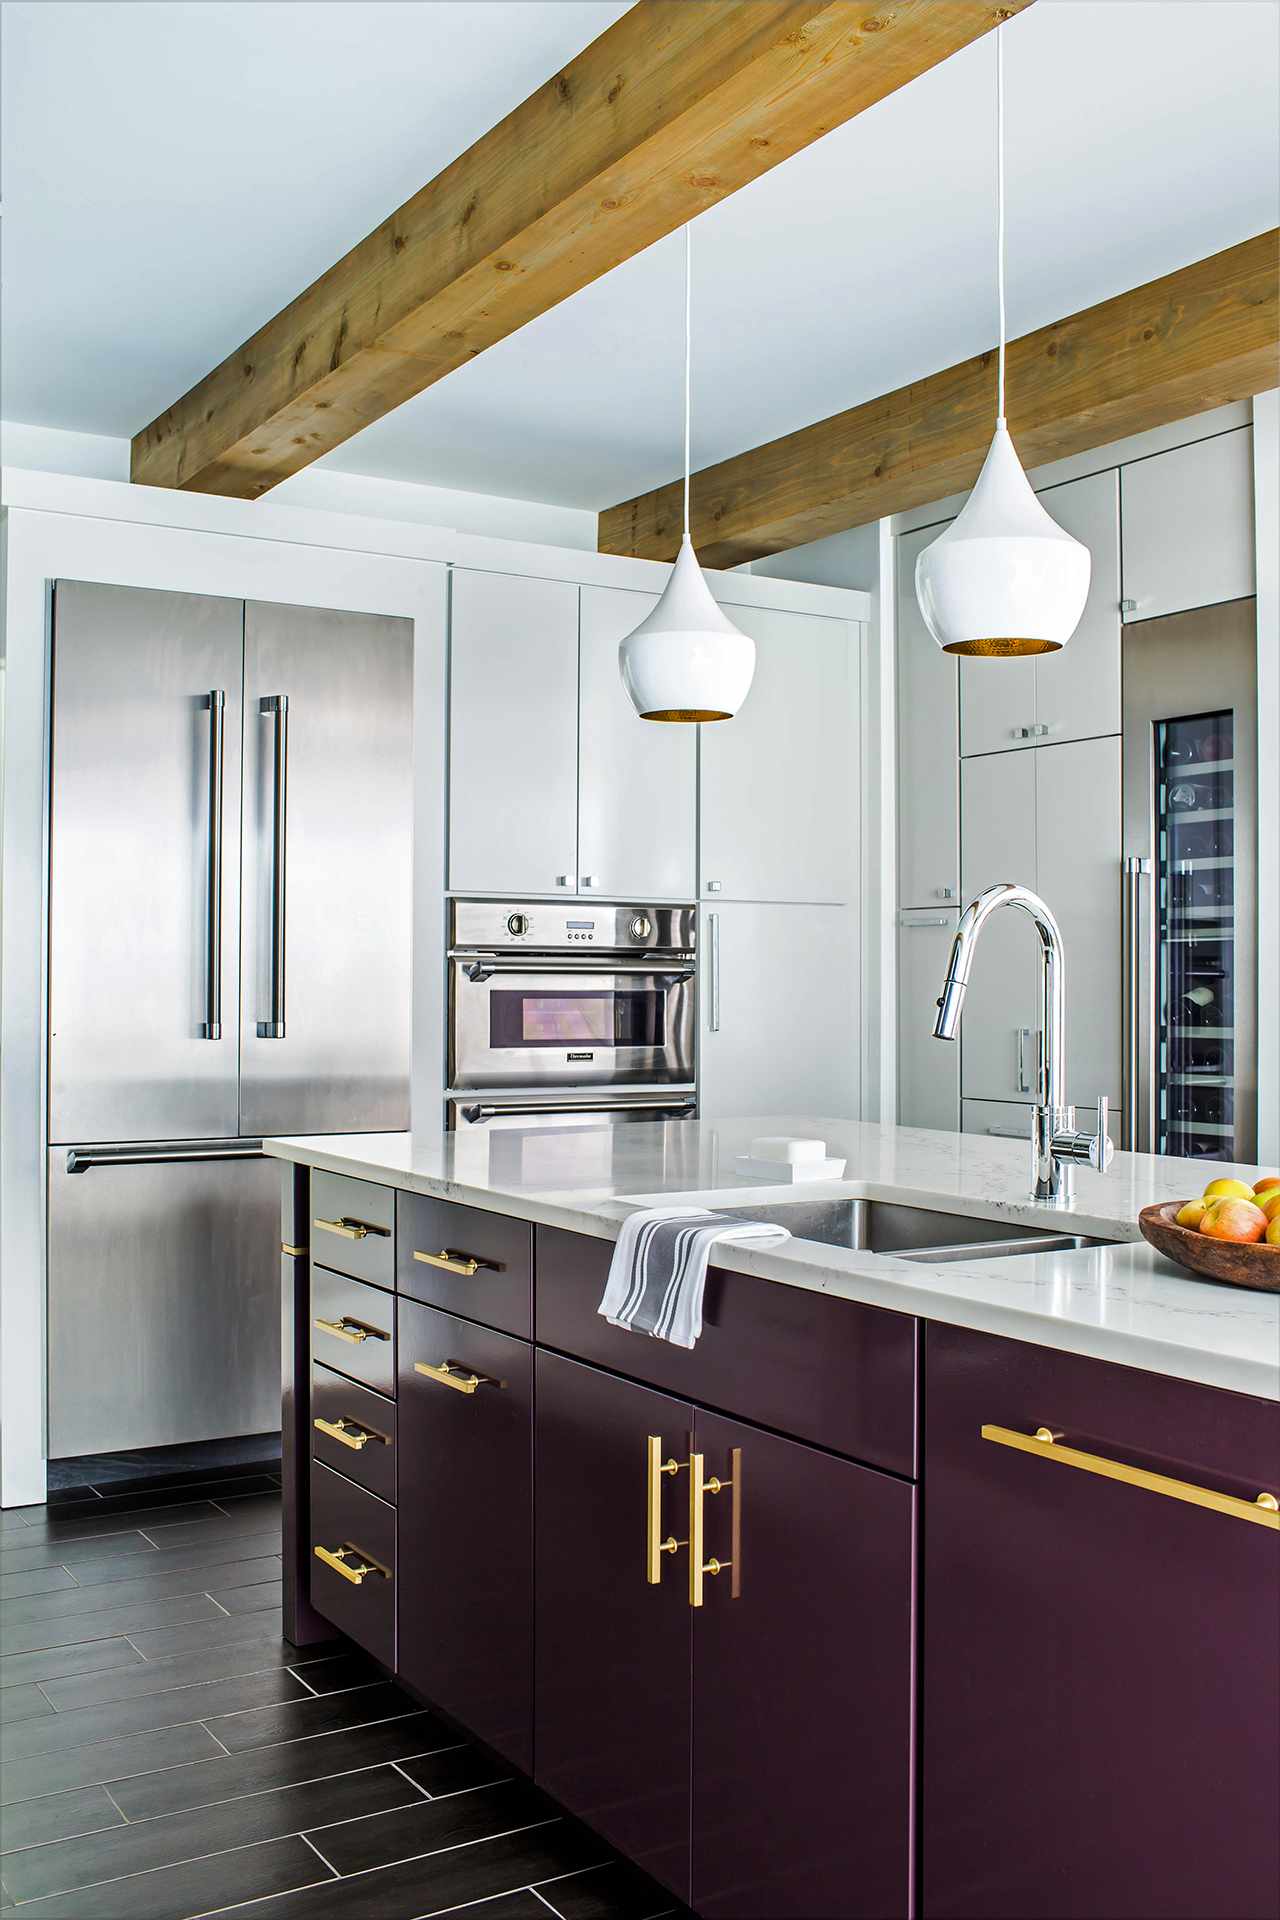 22 Kitchen Cabinetry Trends You'll Love for Years to Come | Better